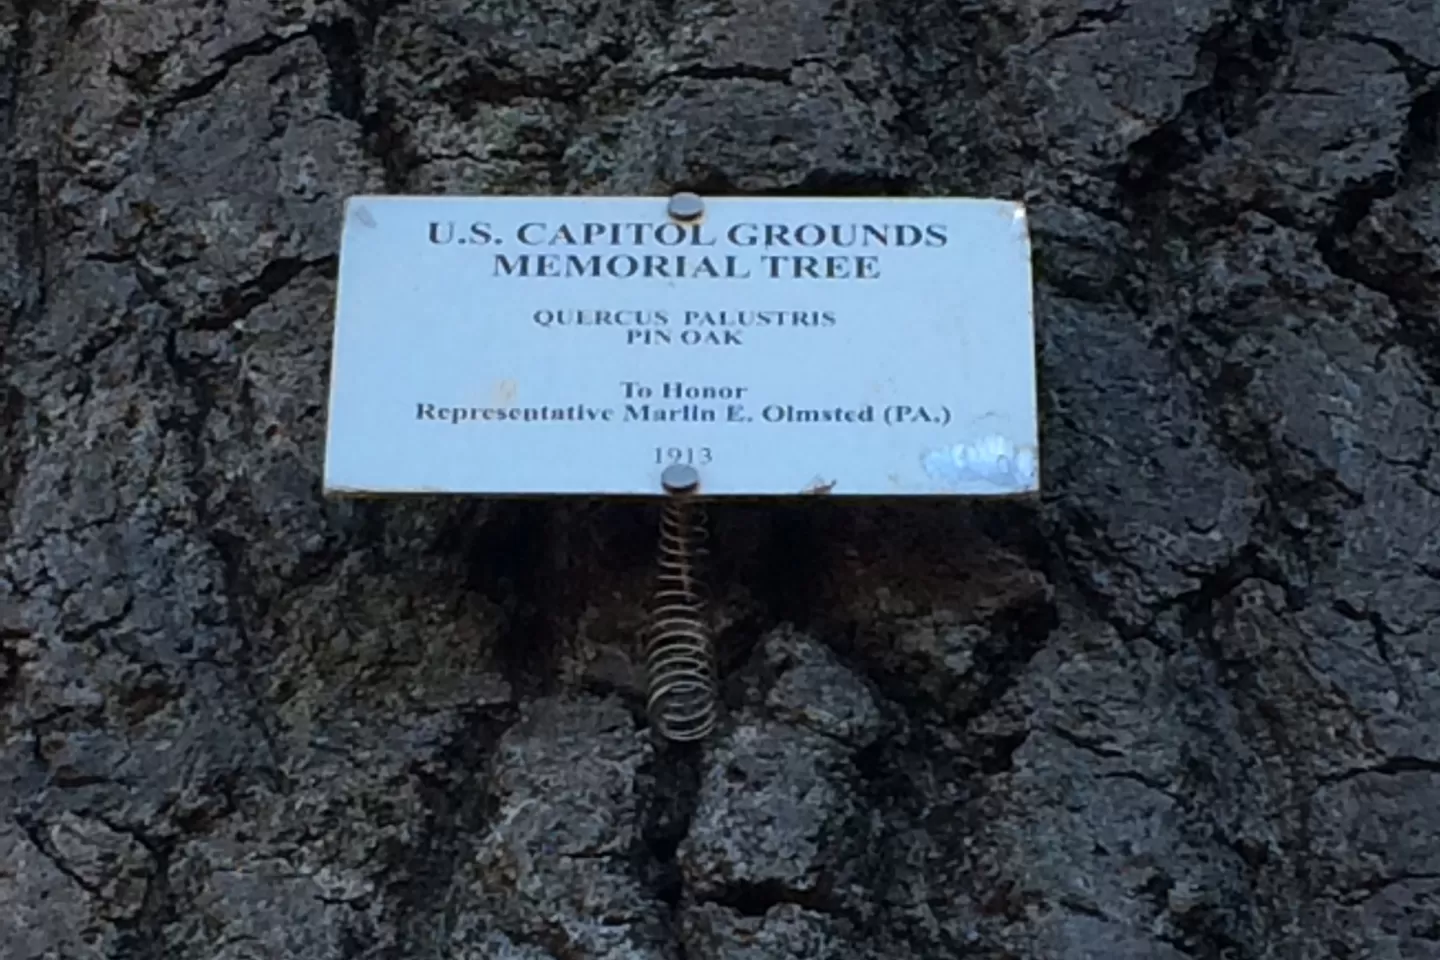 Plaque that reads: U.S. Capitol Grounds Memorial Tree  Quercus palustris (Pin Oak)  To Honor Representative Marlin E. Olmsted (Pa.)  1913